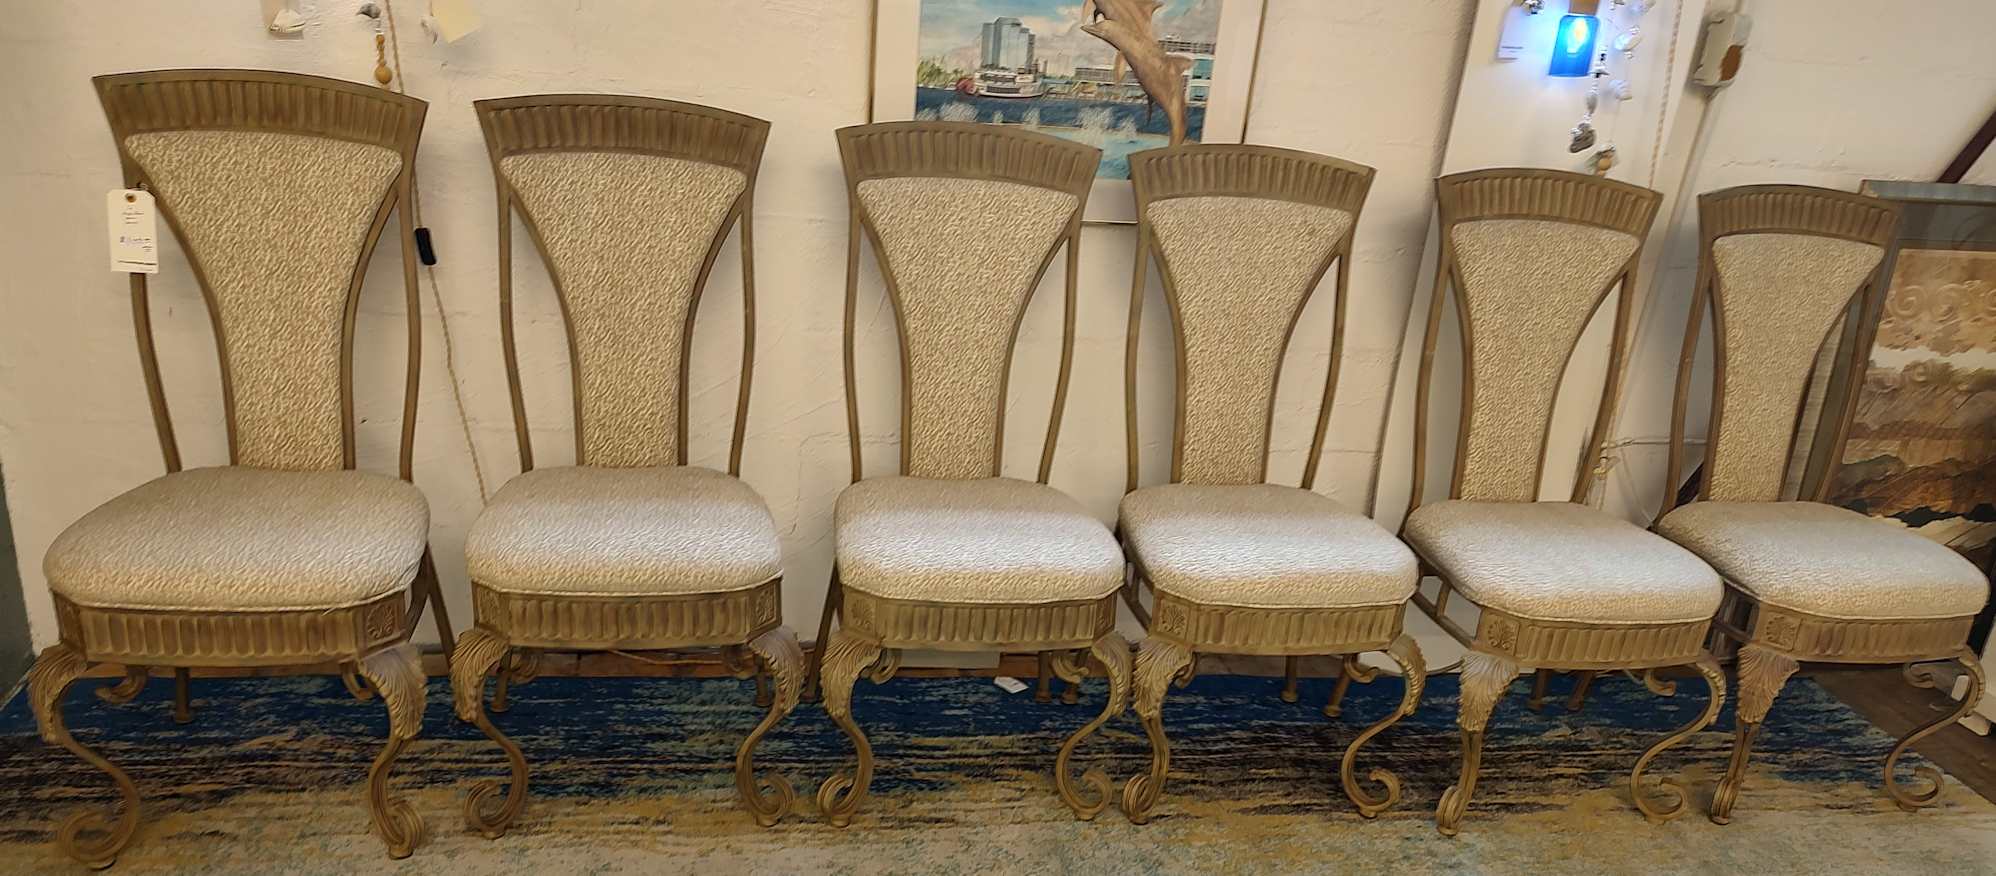 KT0107-6-high-back-chairs